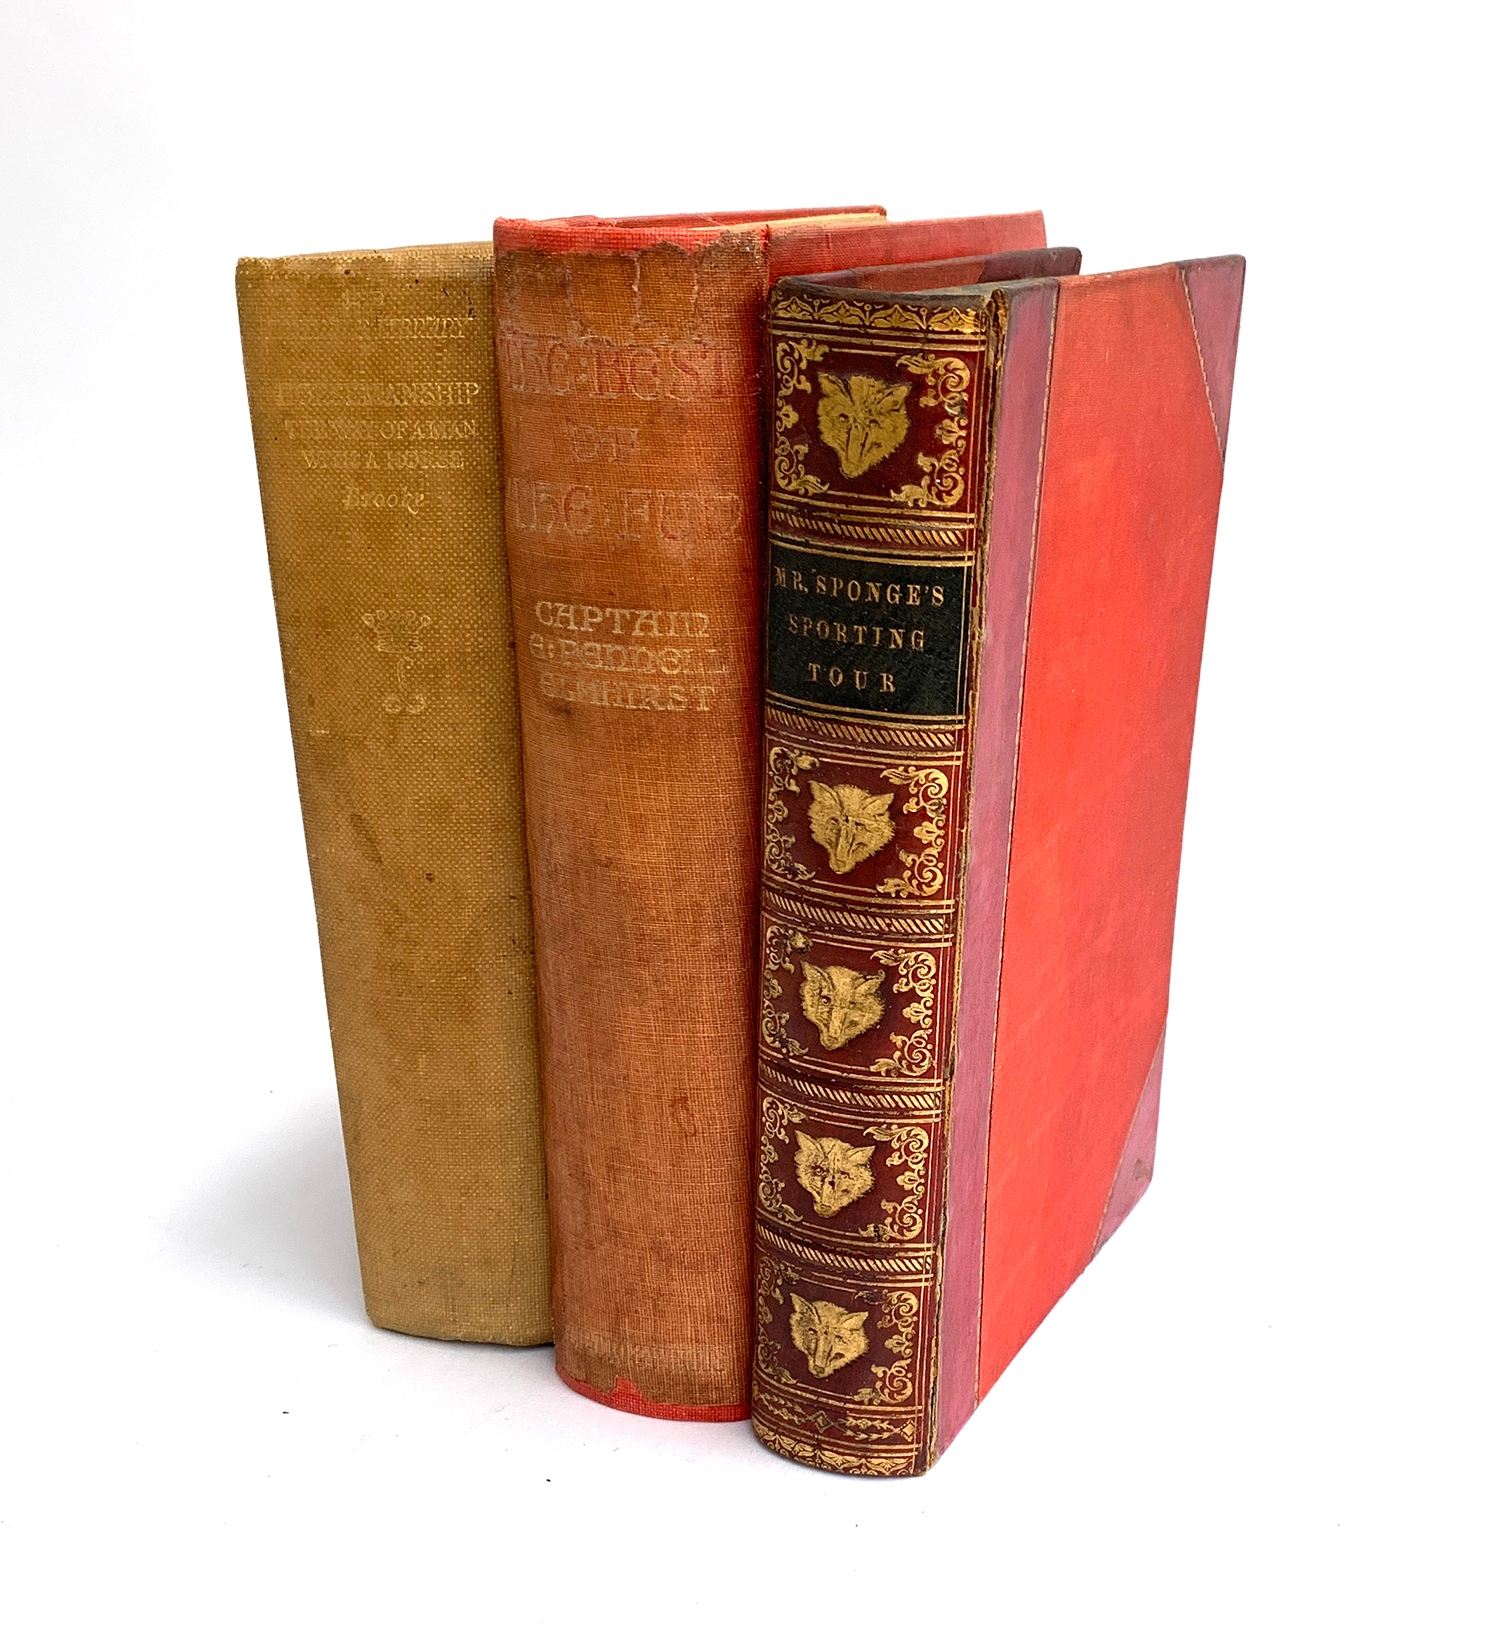 R.S. Surtees, 'Mr Sponge's Sporting Tour', 1st ed., London 1853, hand coloured frontis and 12 hand